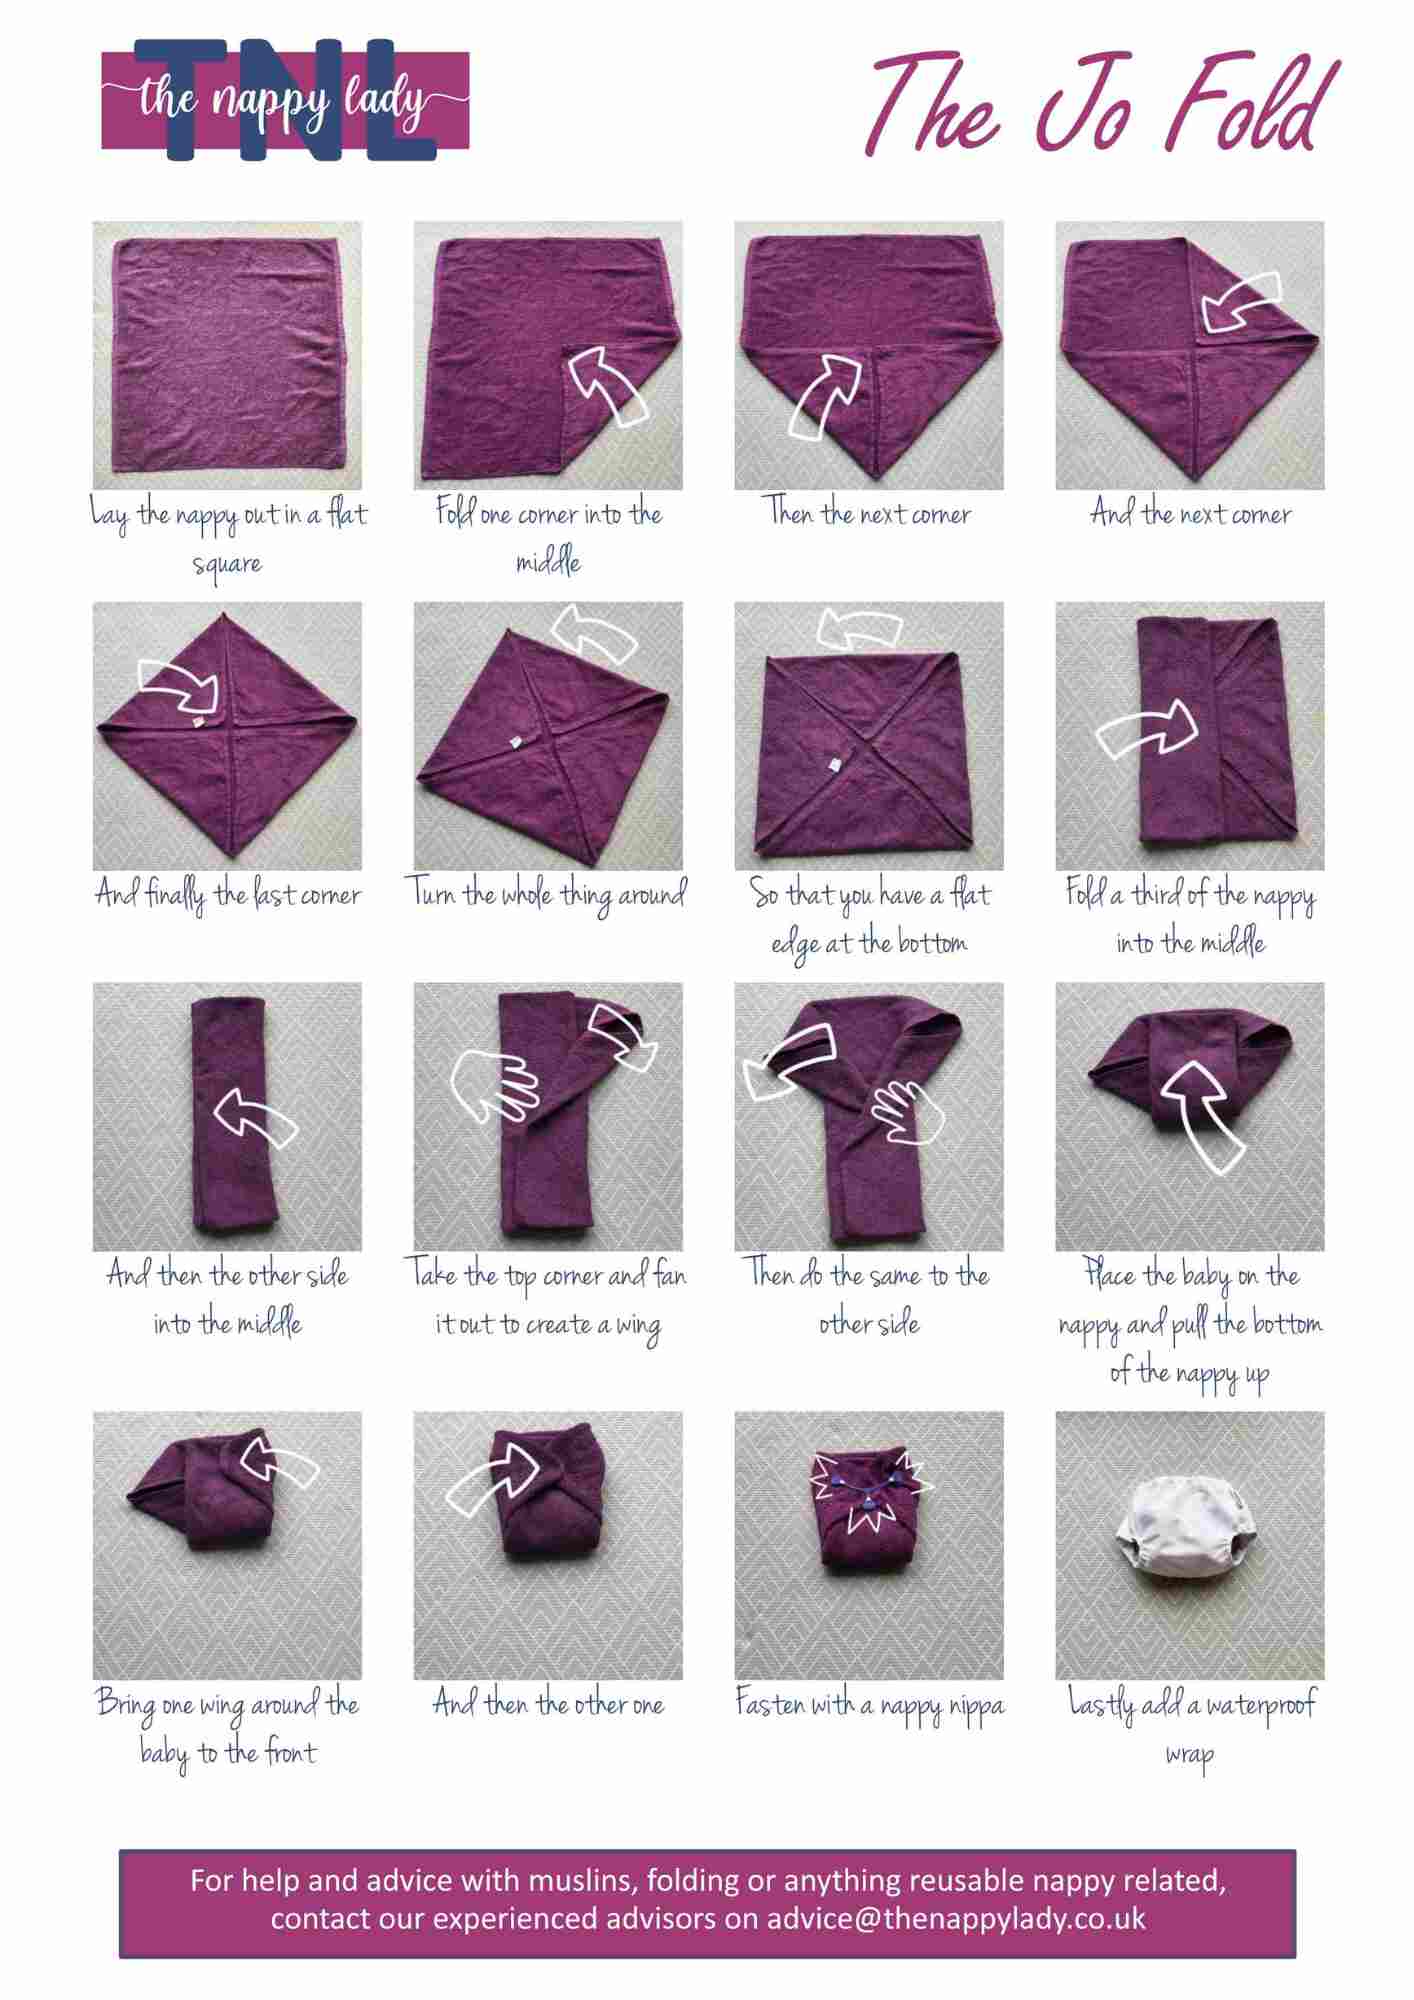 Photo guide on how to fold a terry square